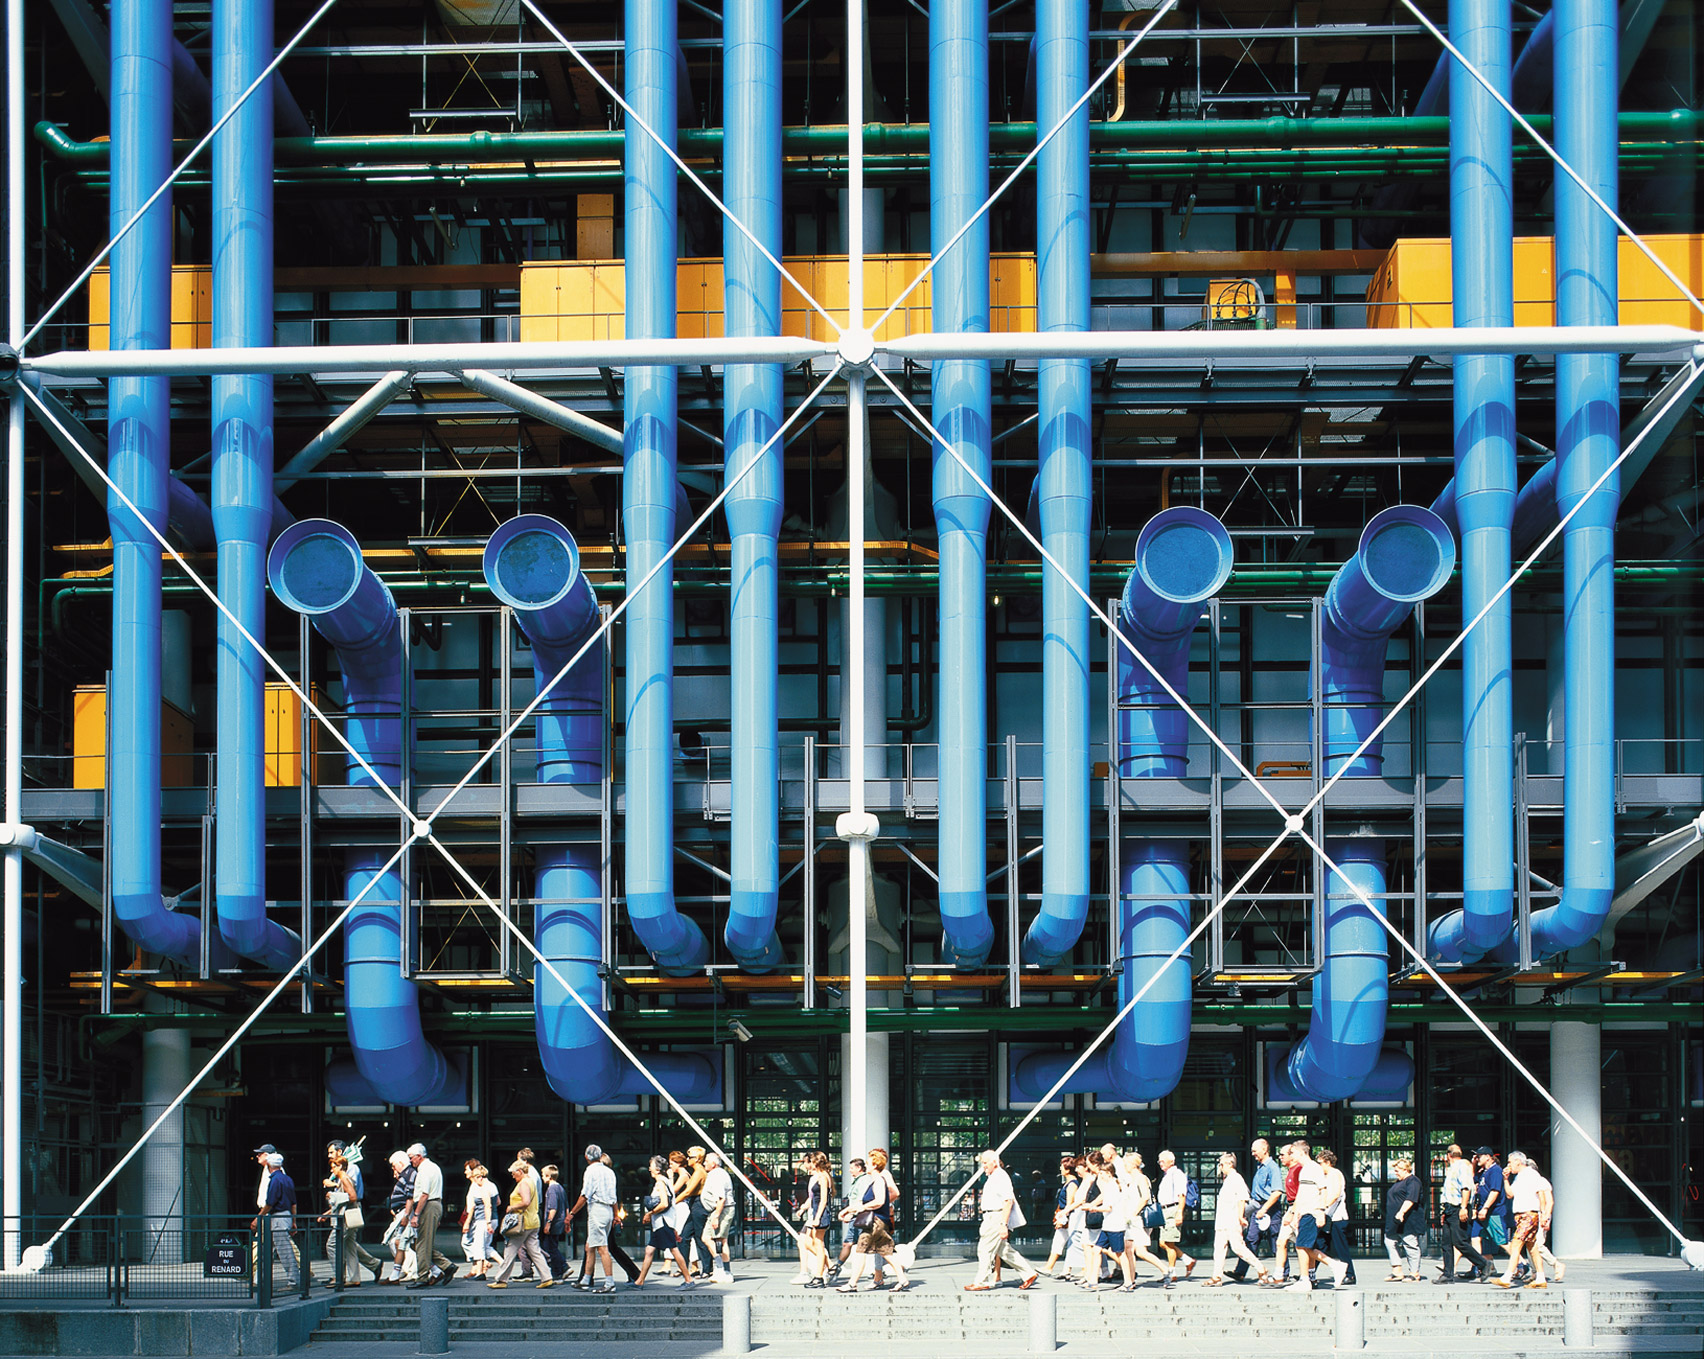 The exterior of the Centre Pompidou by Richard Rogers and Renzo Piano